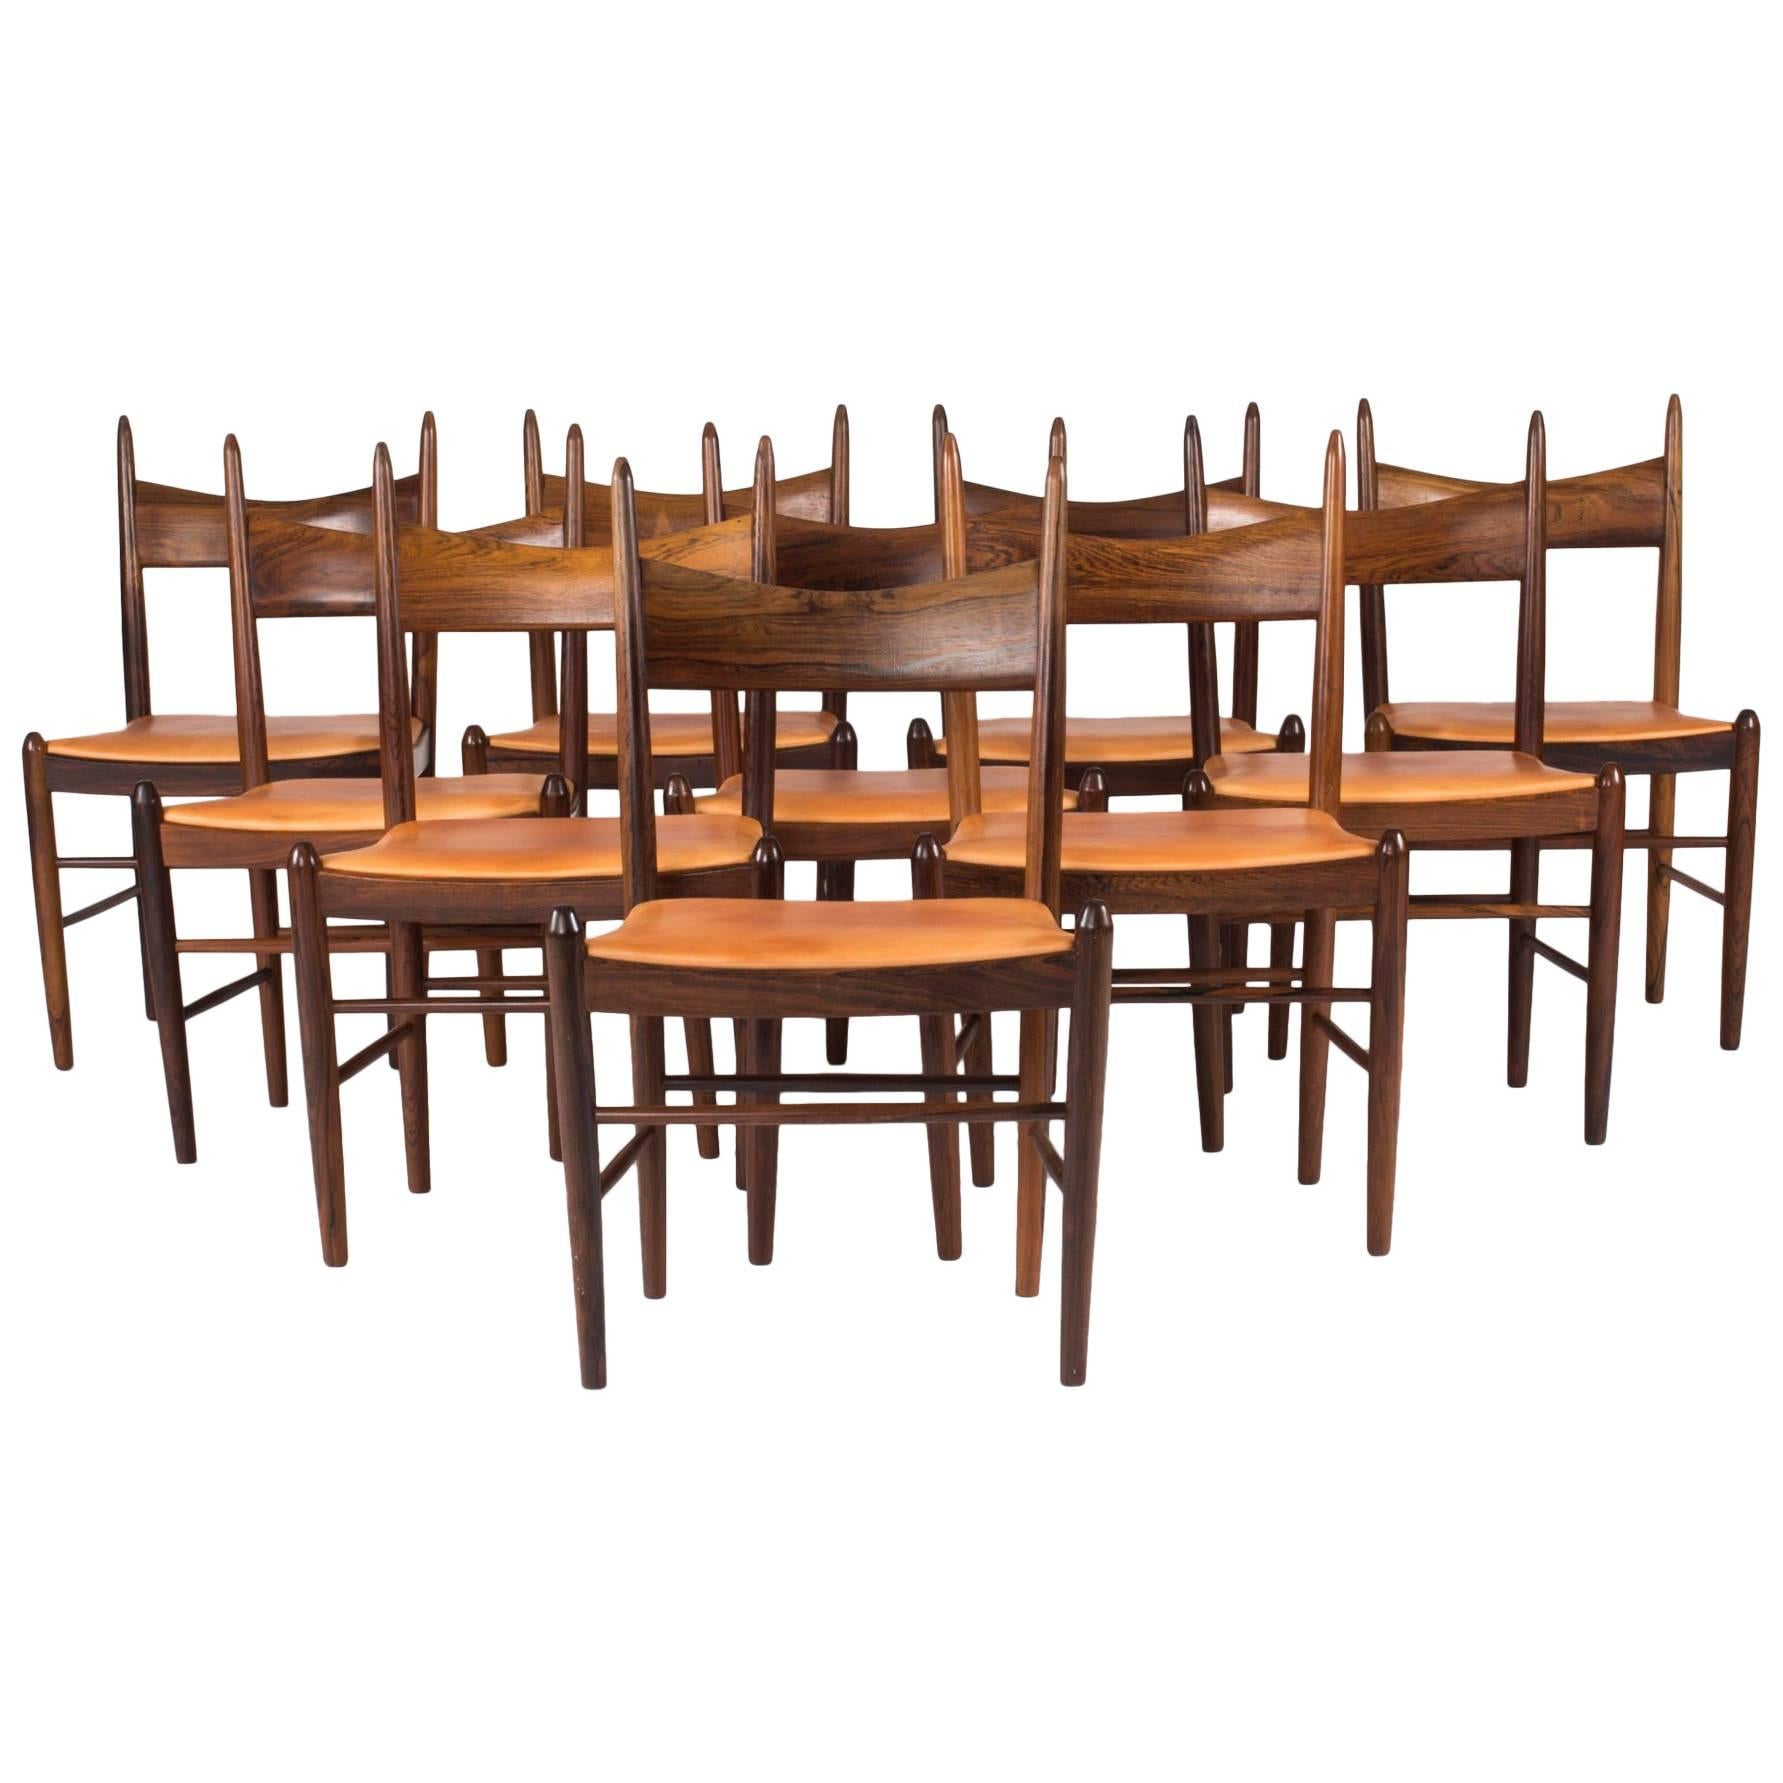 Set of Ten Dining Chairs by H. Vestervig Eriksen